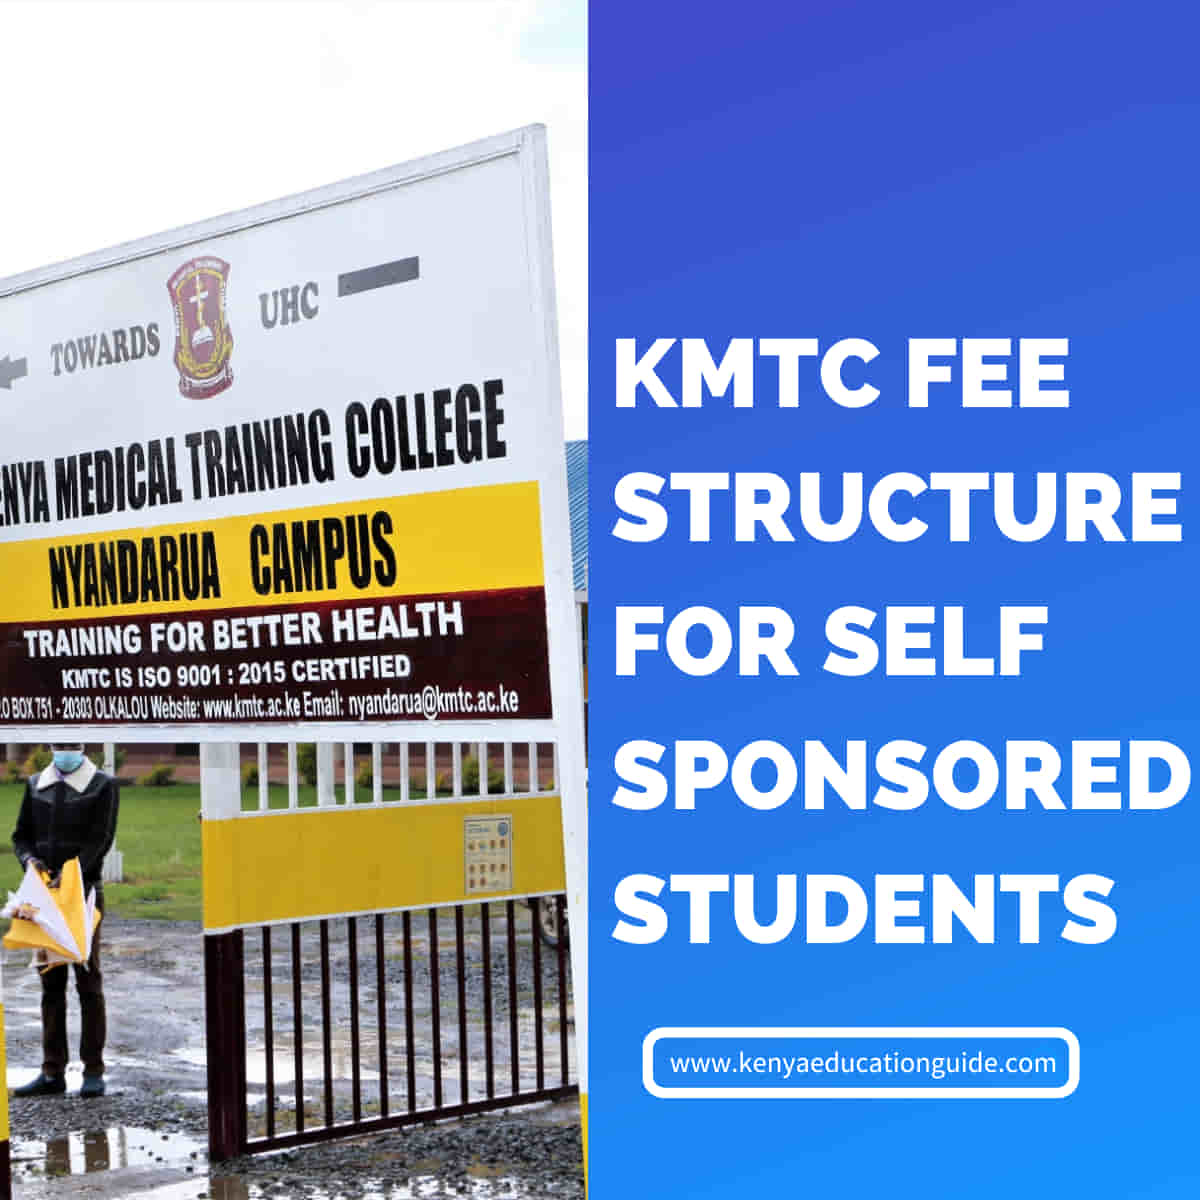 KMTC fee structure for self sponsored students